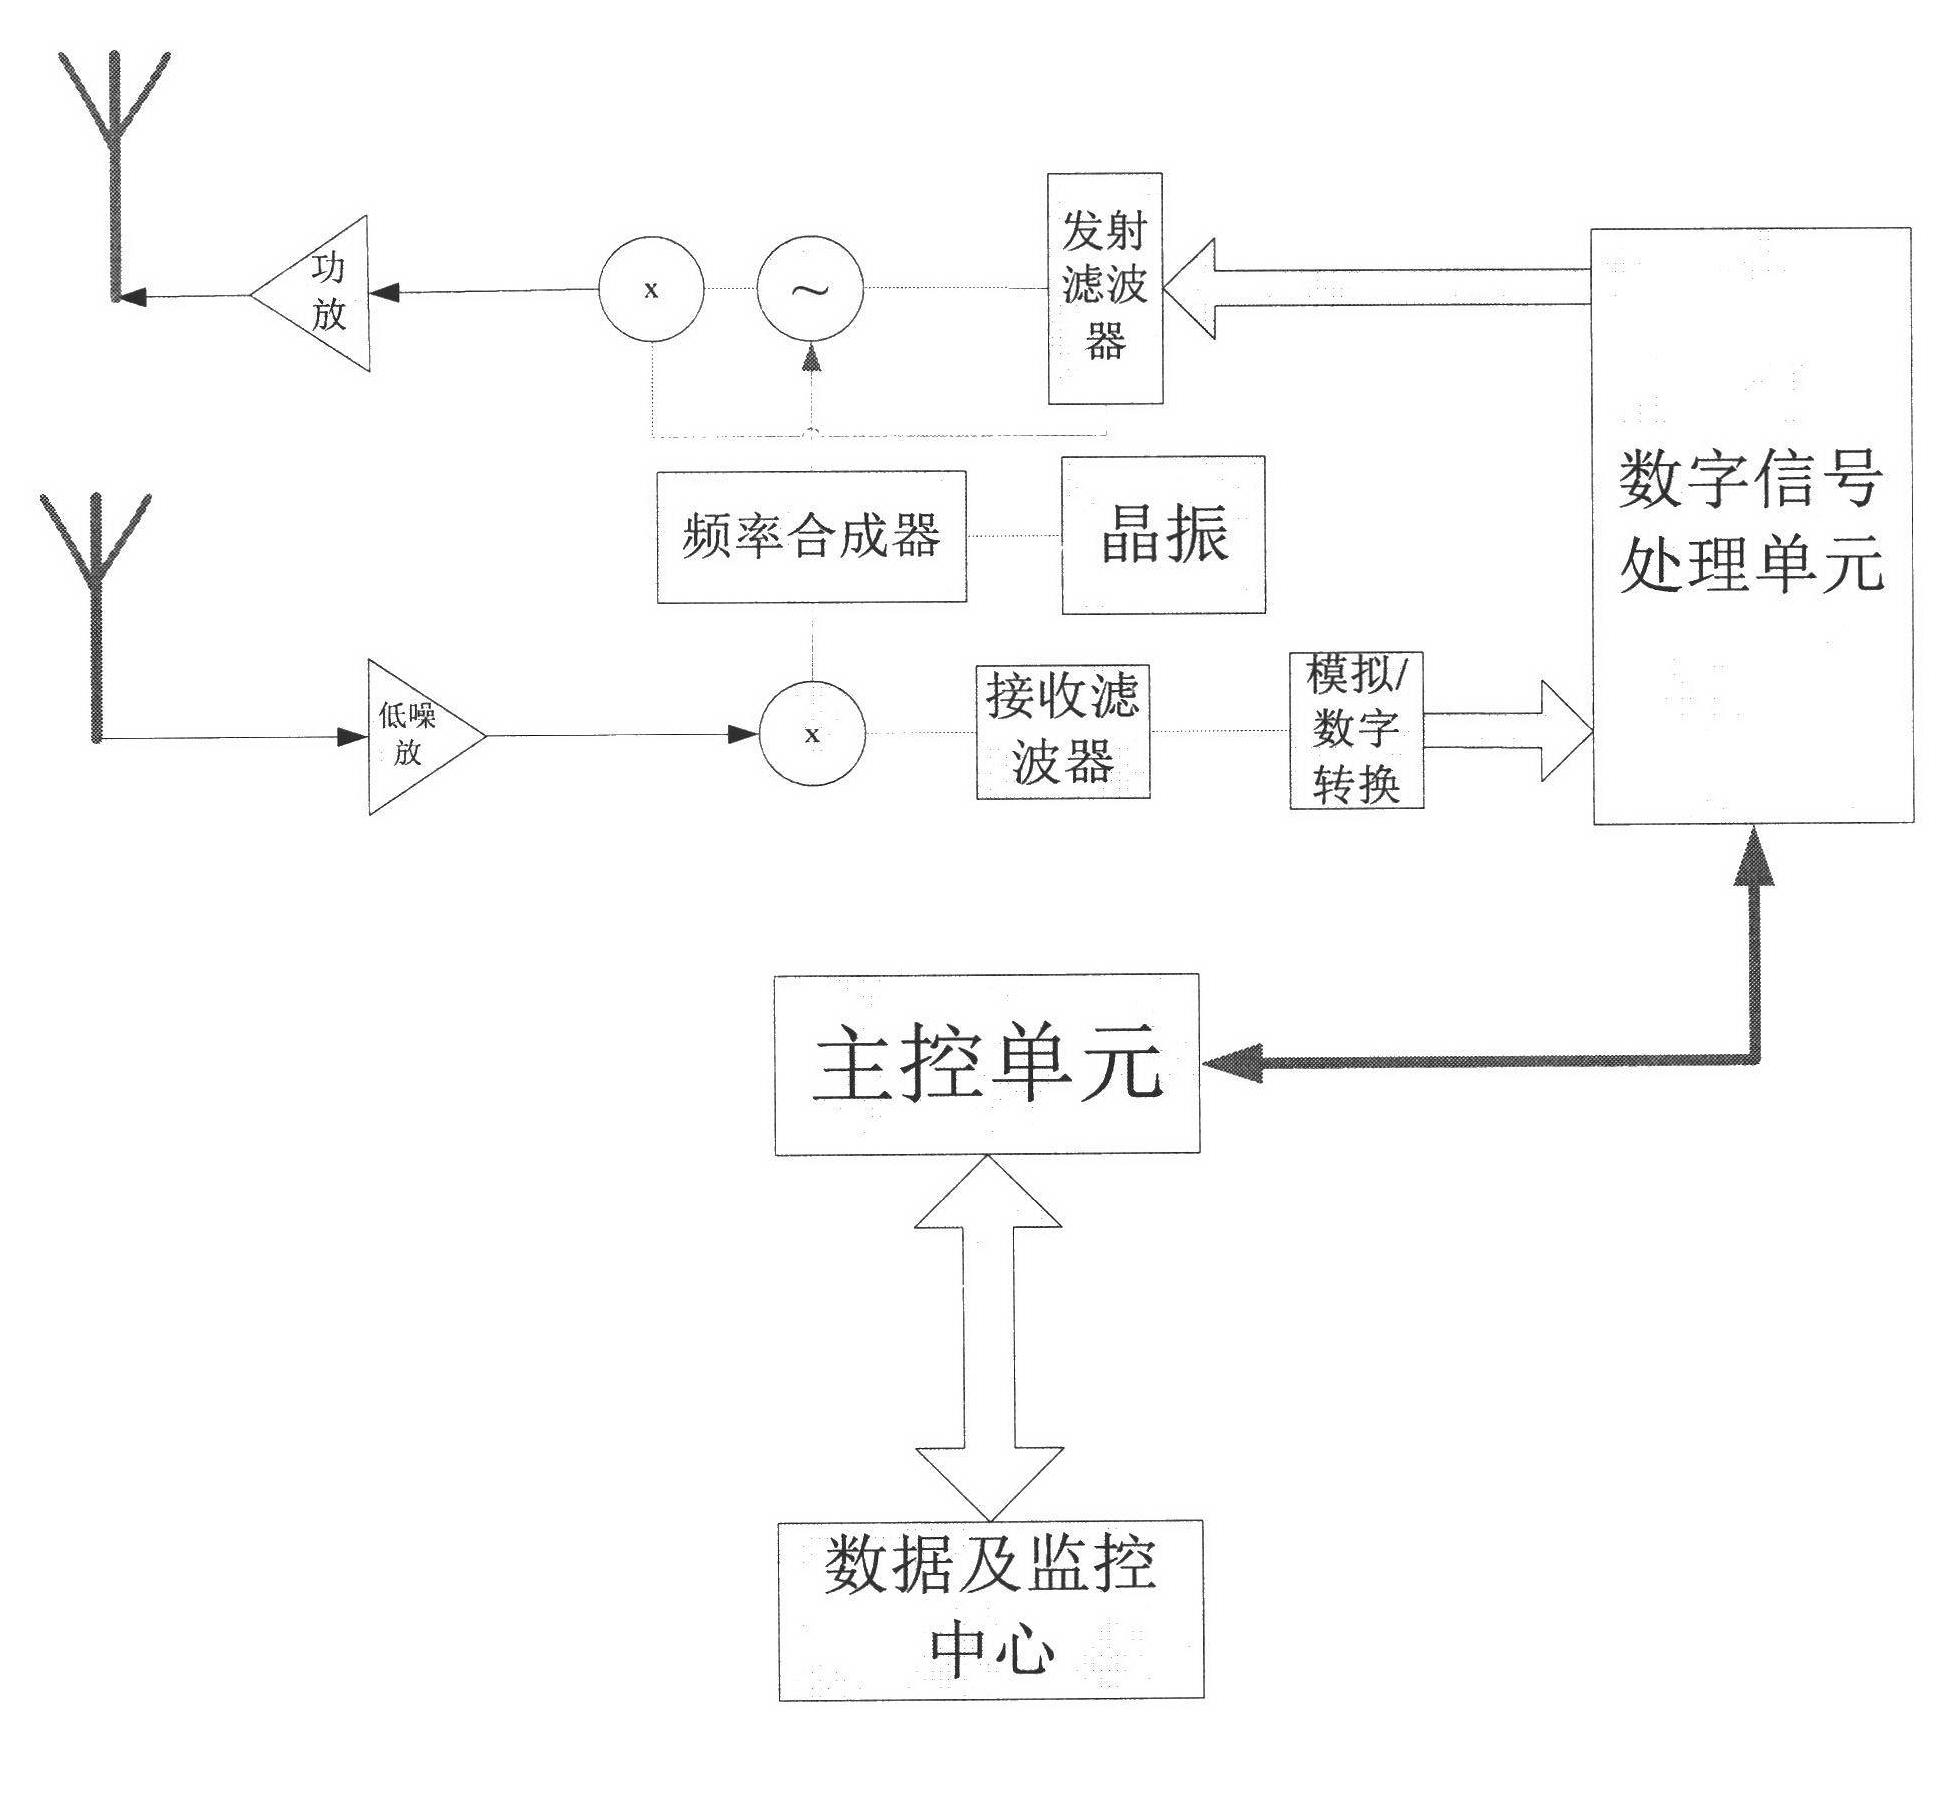 Road side station testing method and device for non-parking charging system